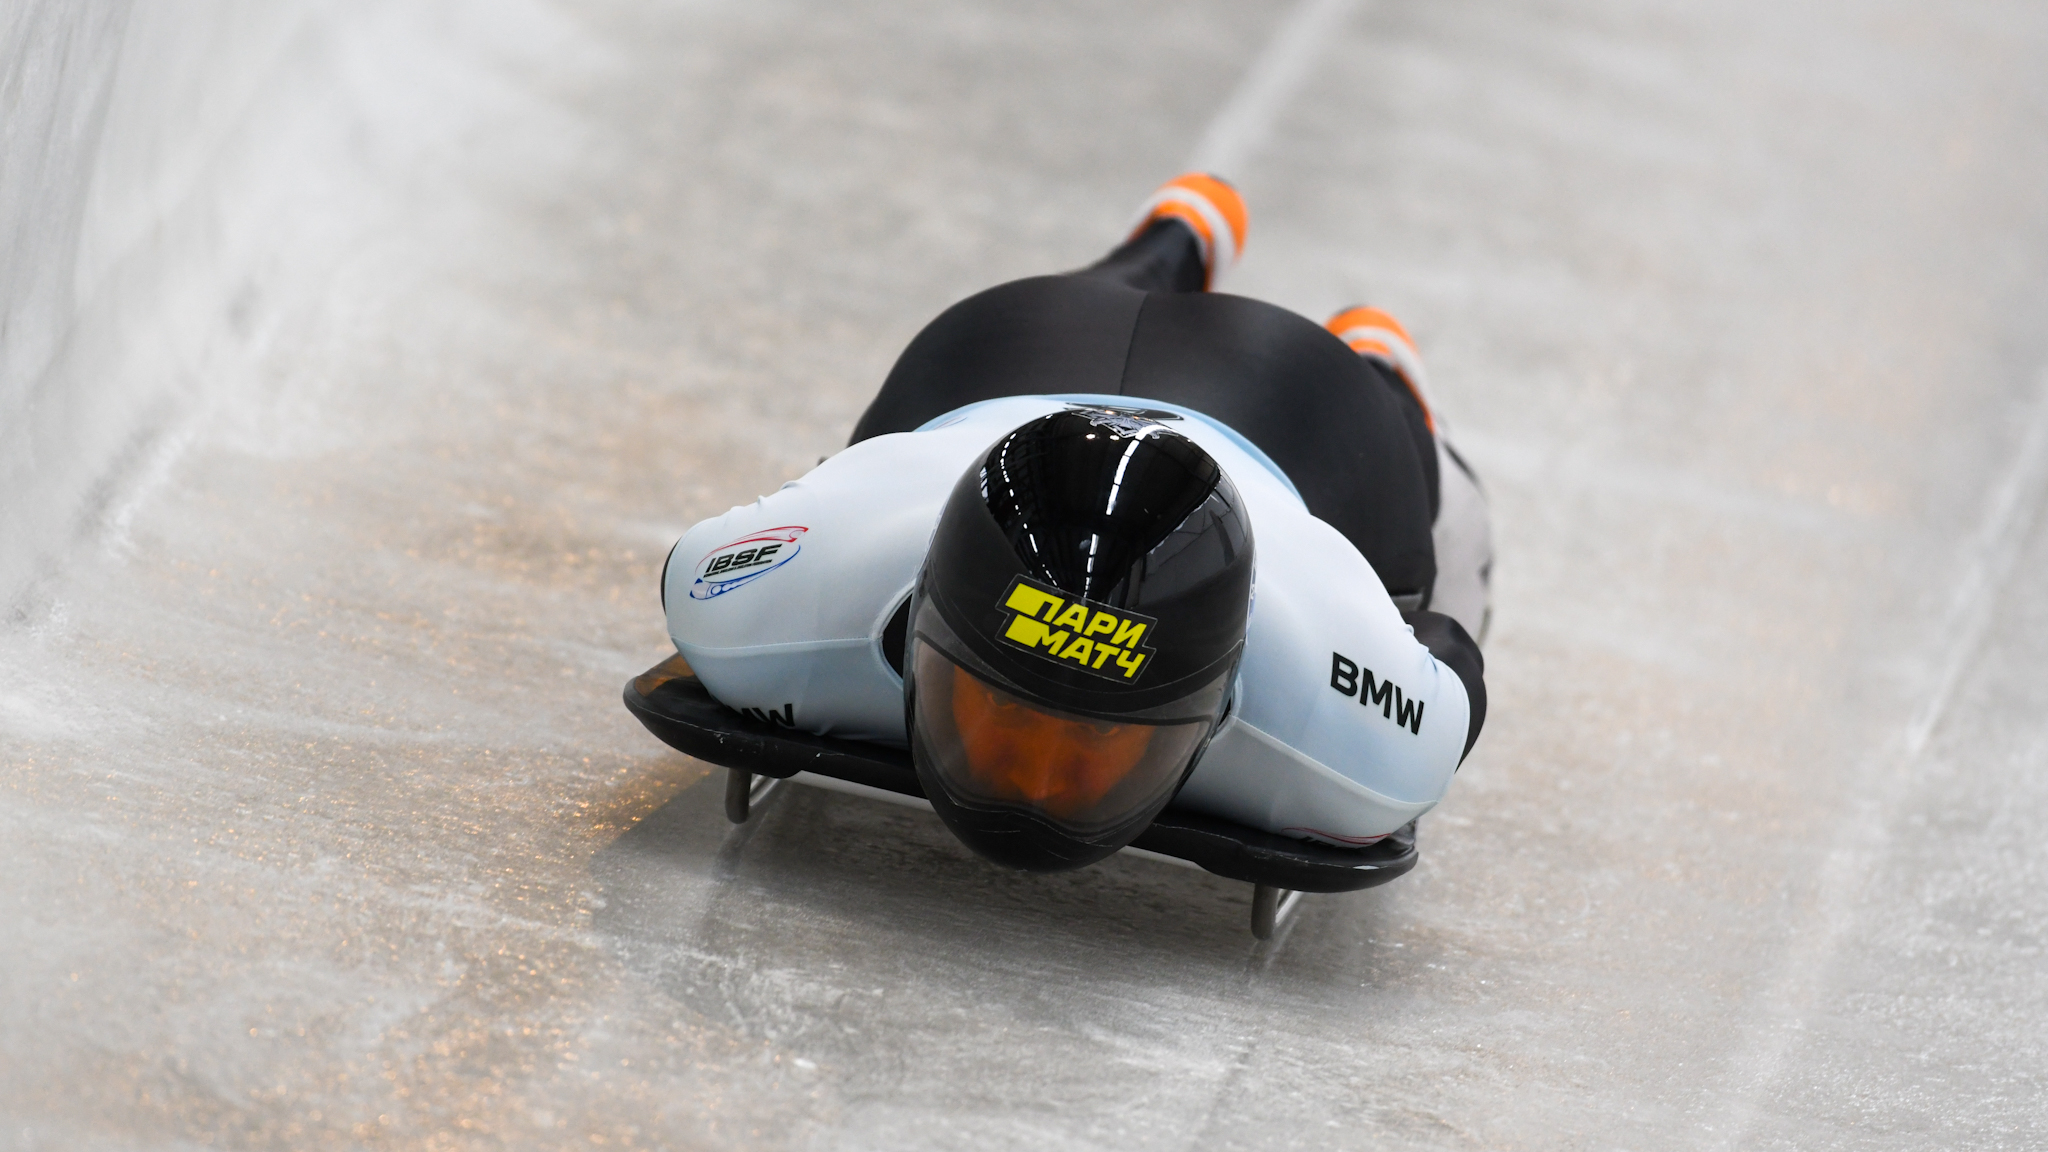 Alexander Tretiakov leads the men's skeleton event after two competition runs ©IBSF/Viesturs Lacis